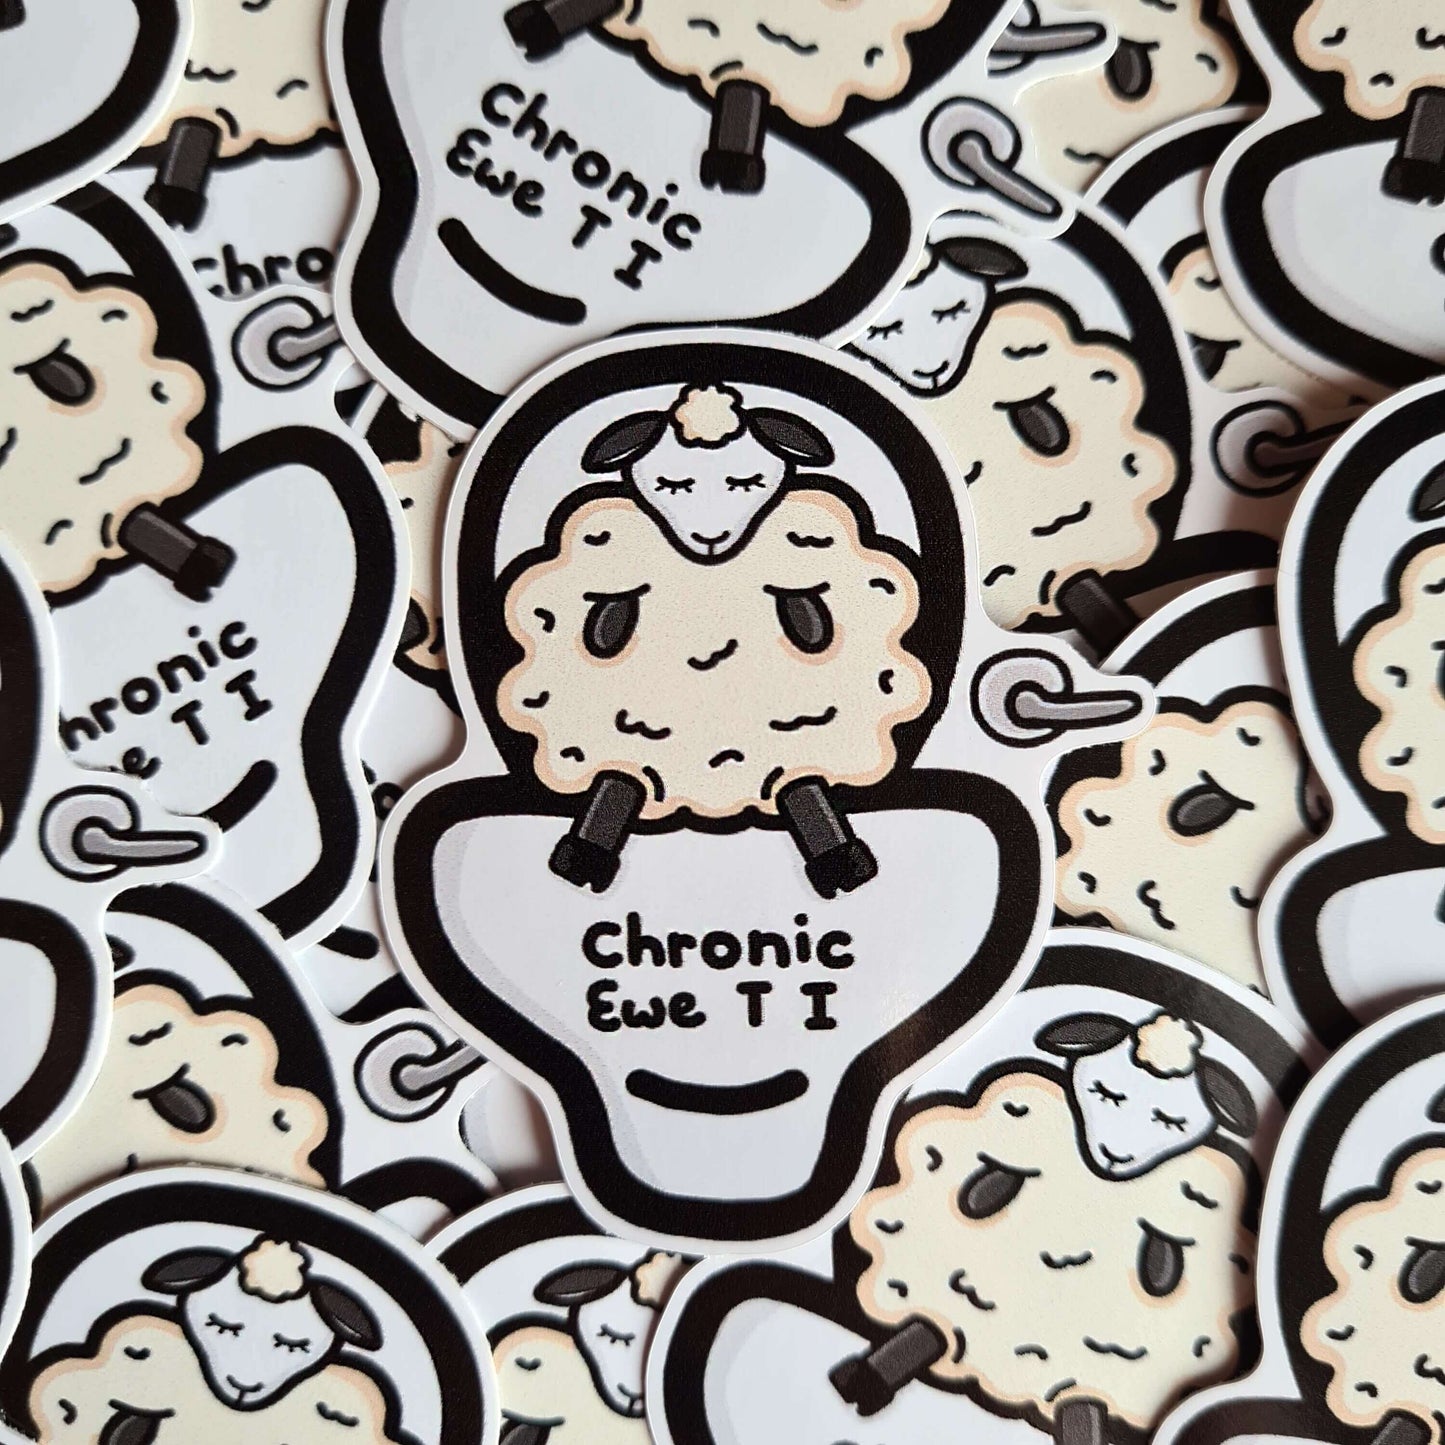 Chronic Ewe T I Sticker - Chronic UTI on a pile of multiple stickers. The sticker features a white sad sheep sat on a large white toilet with black text reading chronic ewe T I. The design is raising awareness for chronic utis.